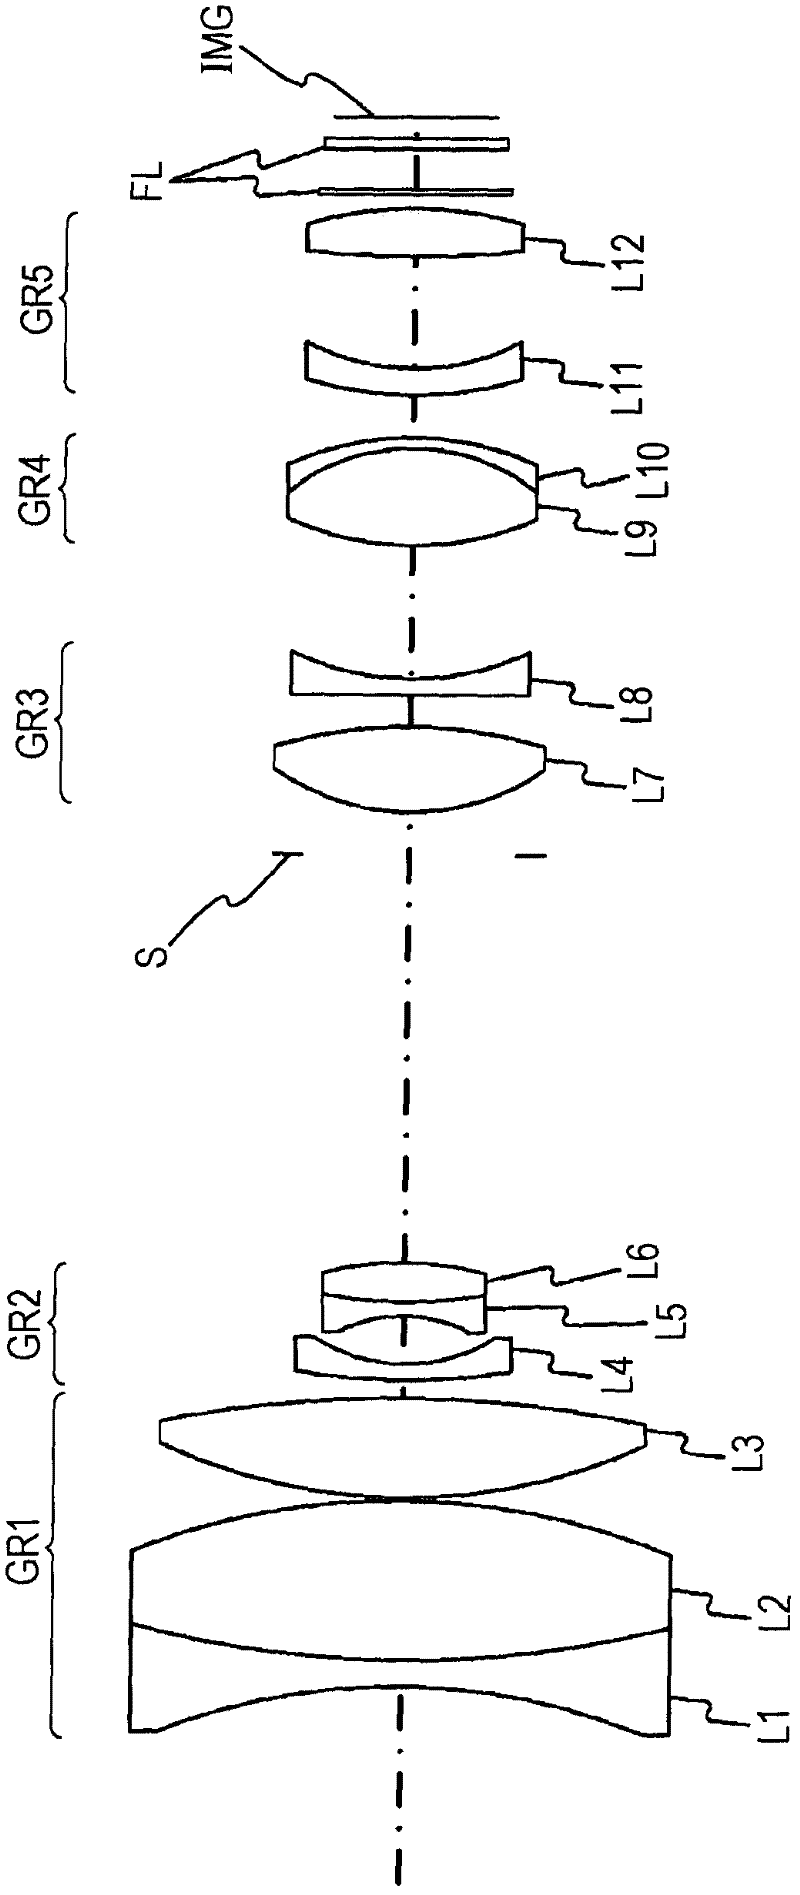 Zoom lens and image capturing apparatus